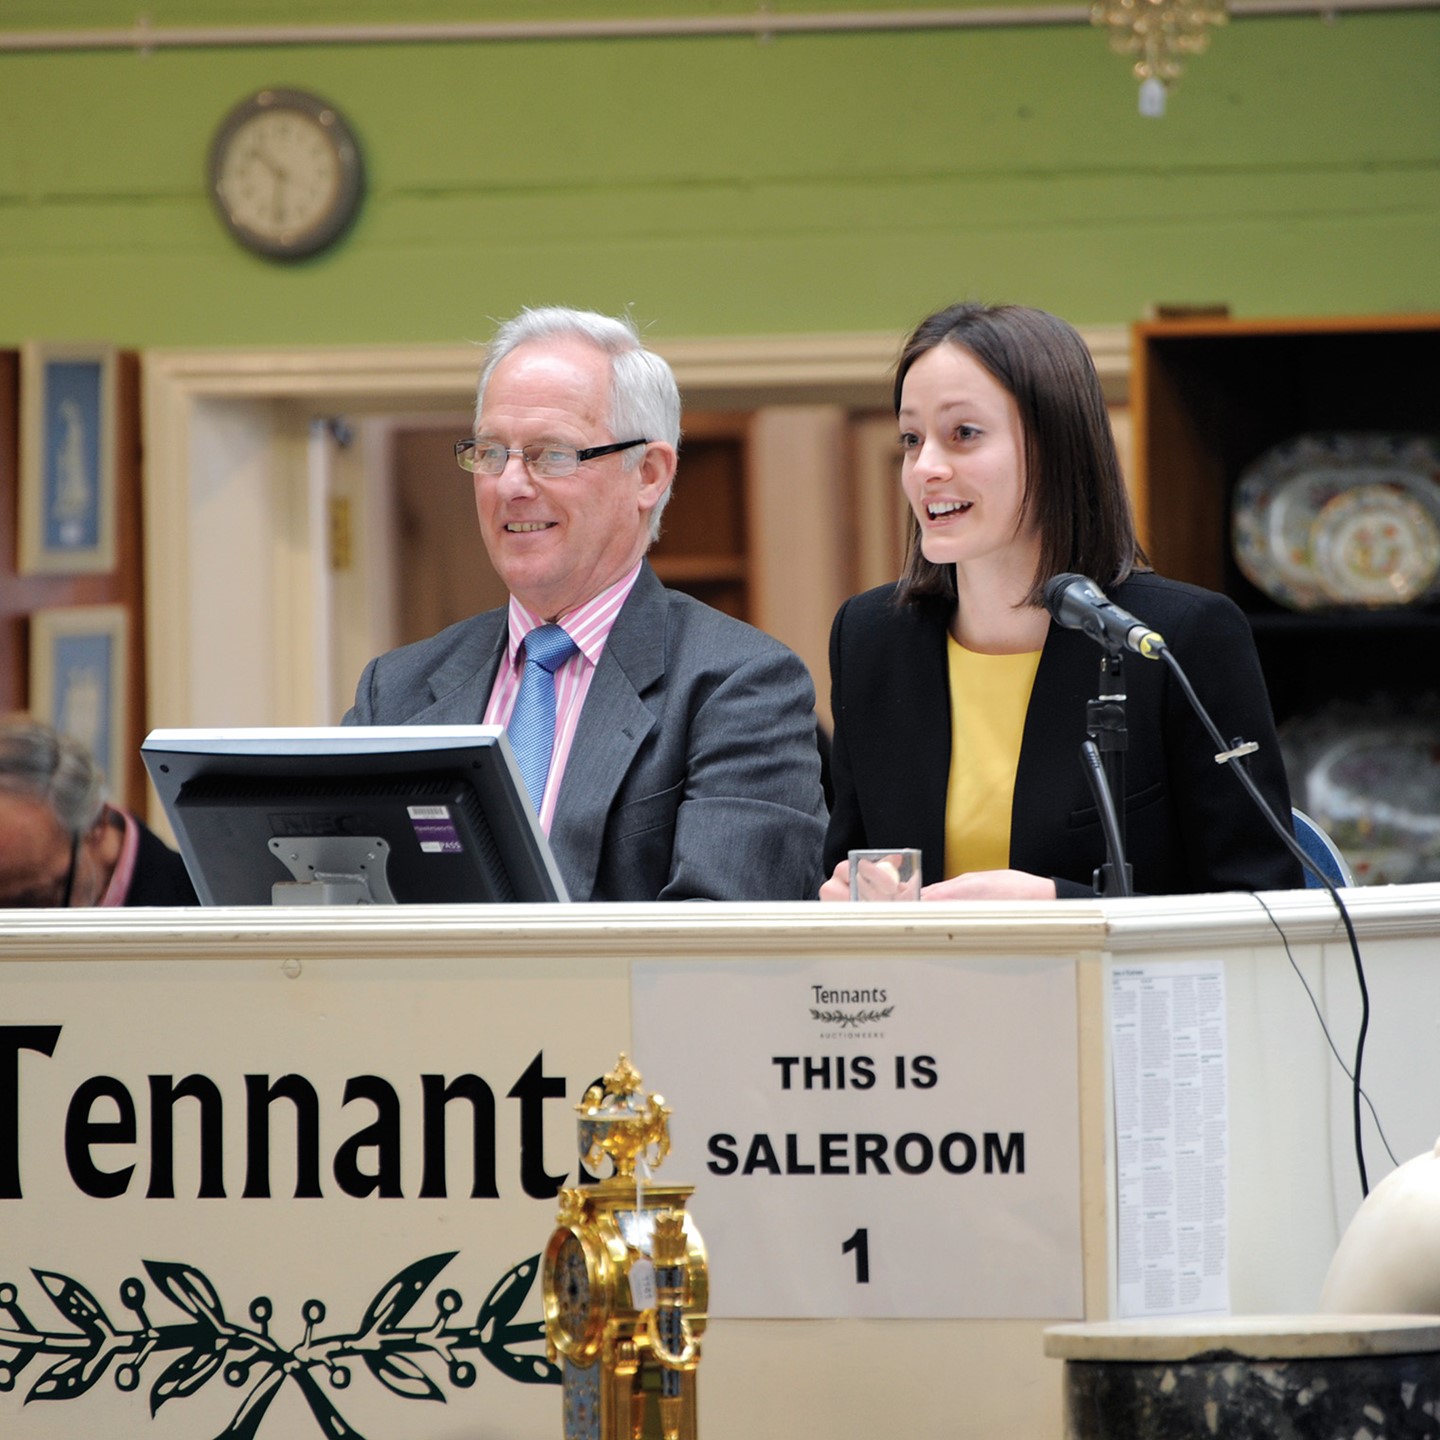 Auctioneers on the rostrum